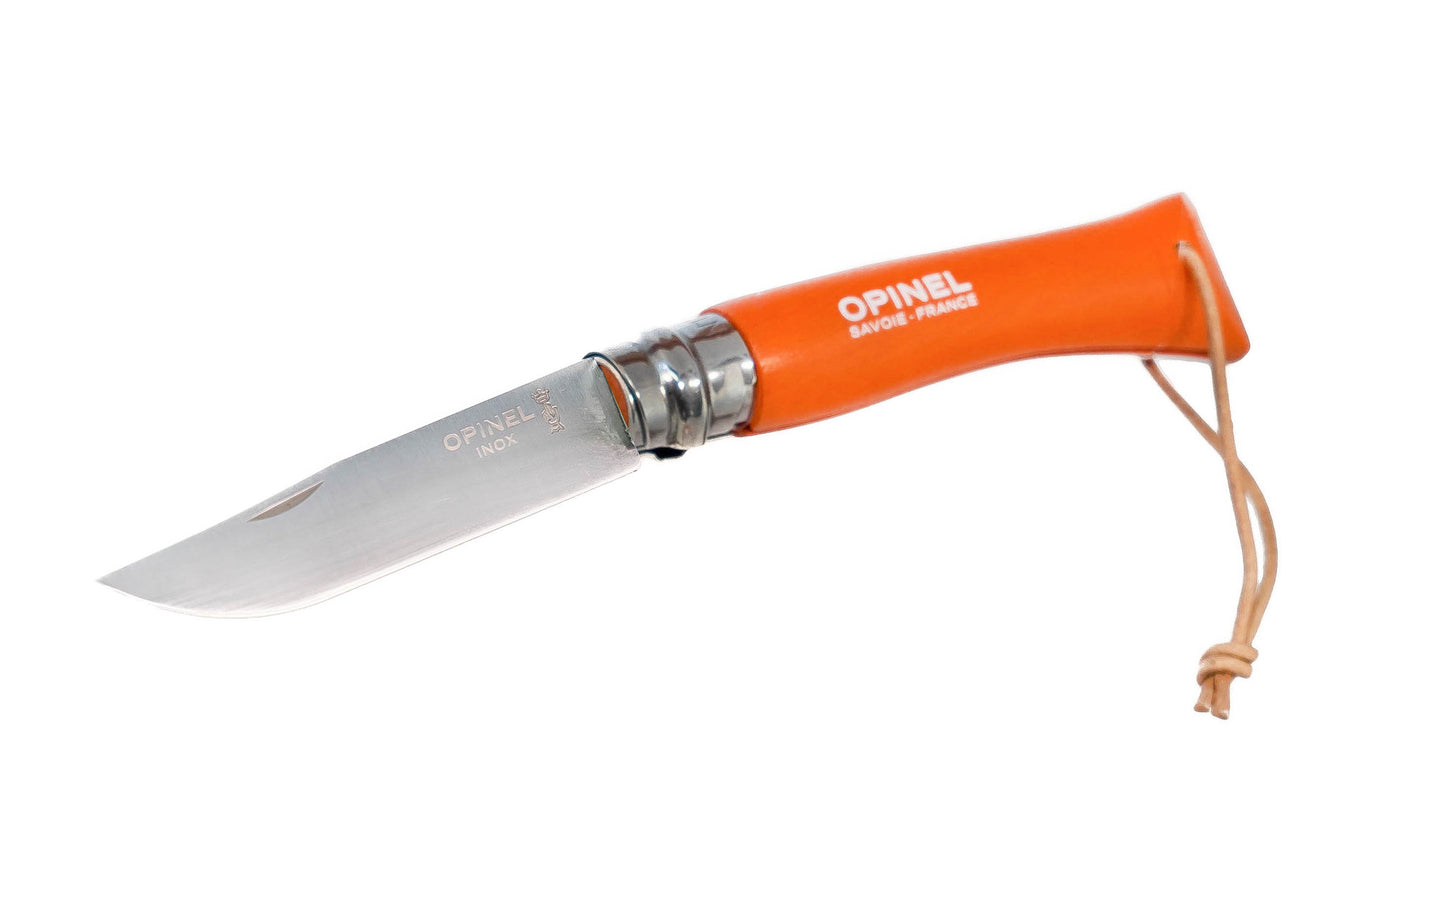 Opinel Stainless Steel Trekking Knife ~ "Tangerine" Color ~ Made in France ~ 3-3/16" long foldable blade with stainless locking collar ~ Made of 12c27 Sandvik stainless steel ~ Painted Beechwood handle with leather loop